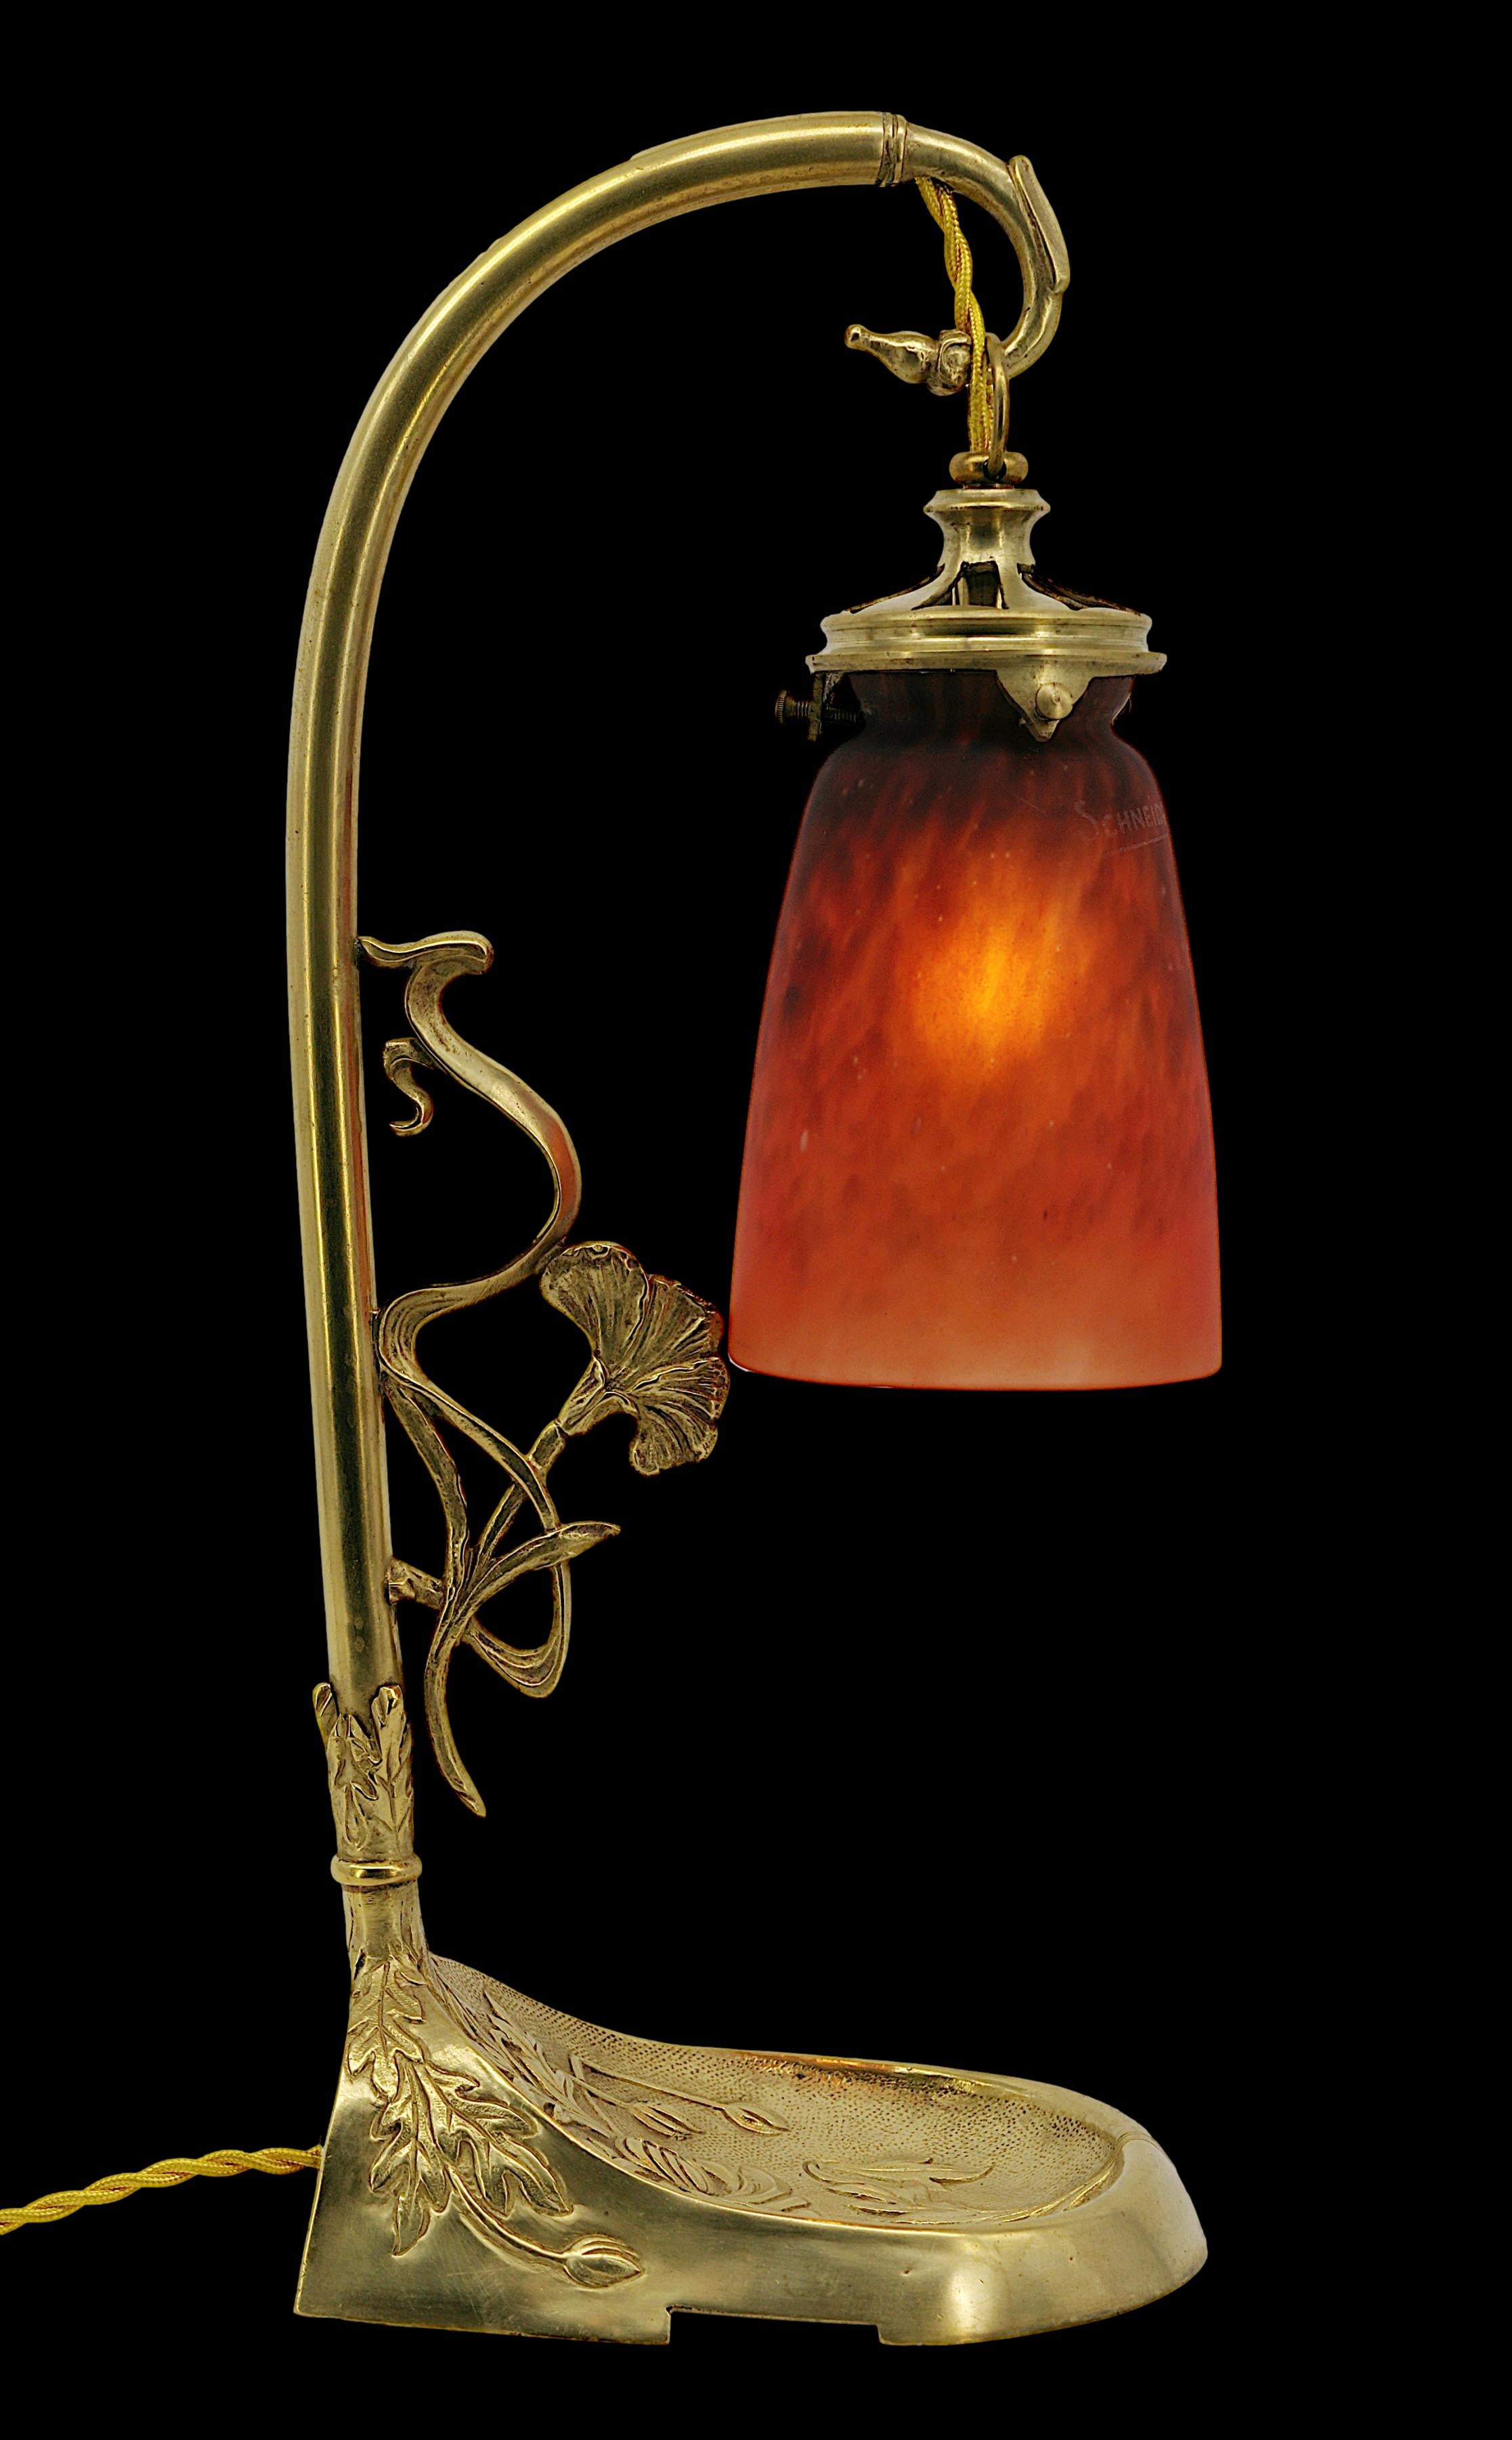 French Art Deco table lamp by Charles Schneider, Epinay-sur-Seine (Paris), 1924-1928. Mottled glass shade, powders are applied between two layers that comes on its elegant solid bronze base. Height : 16.1